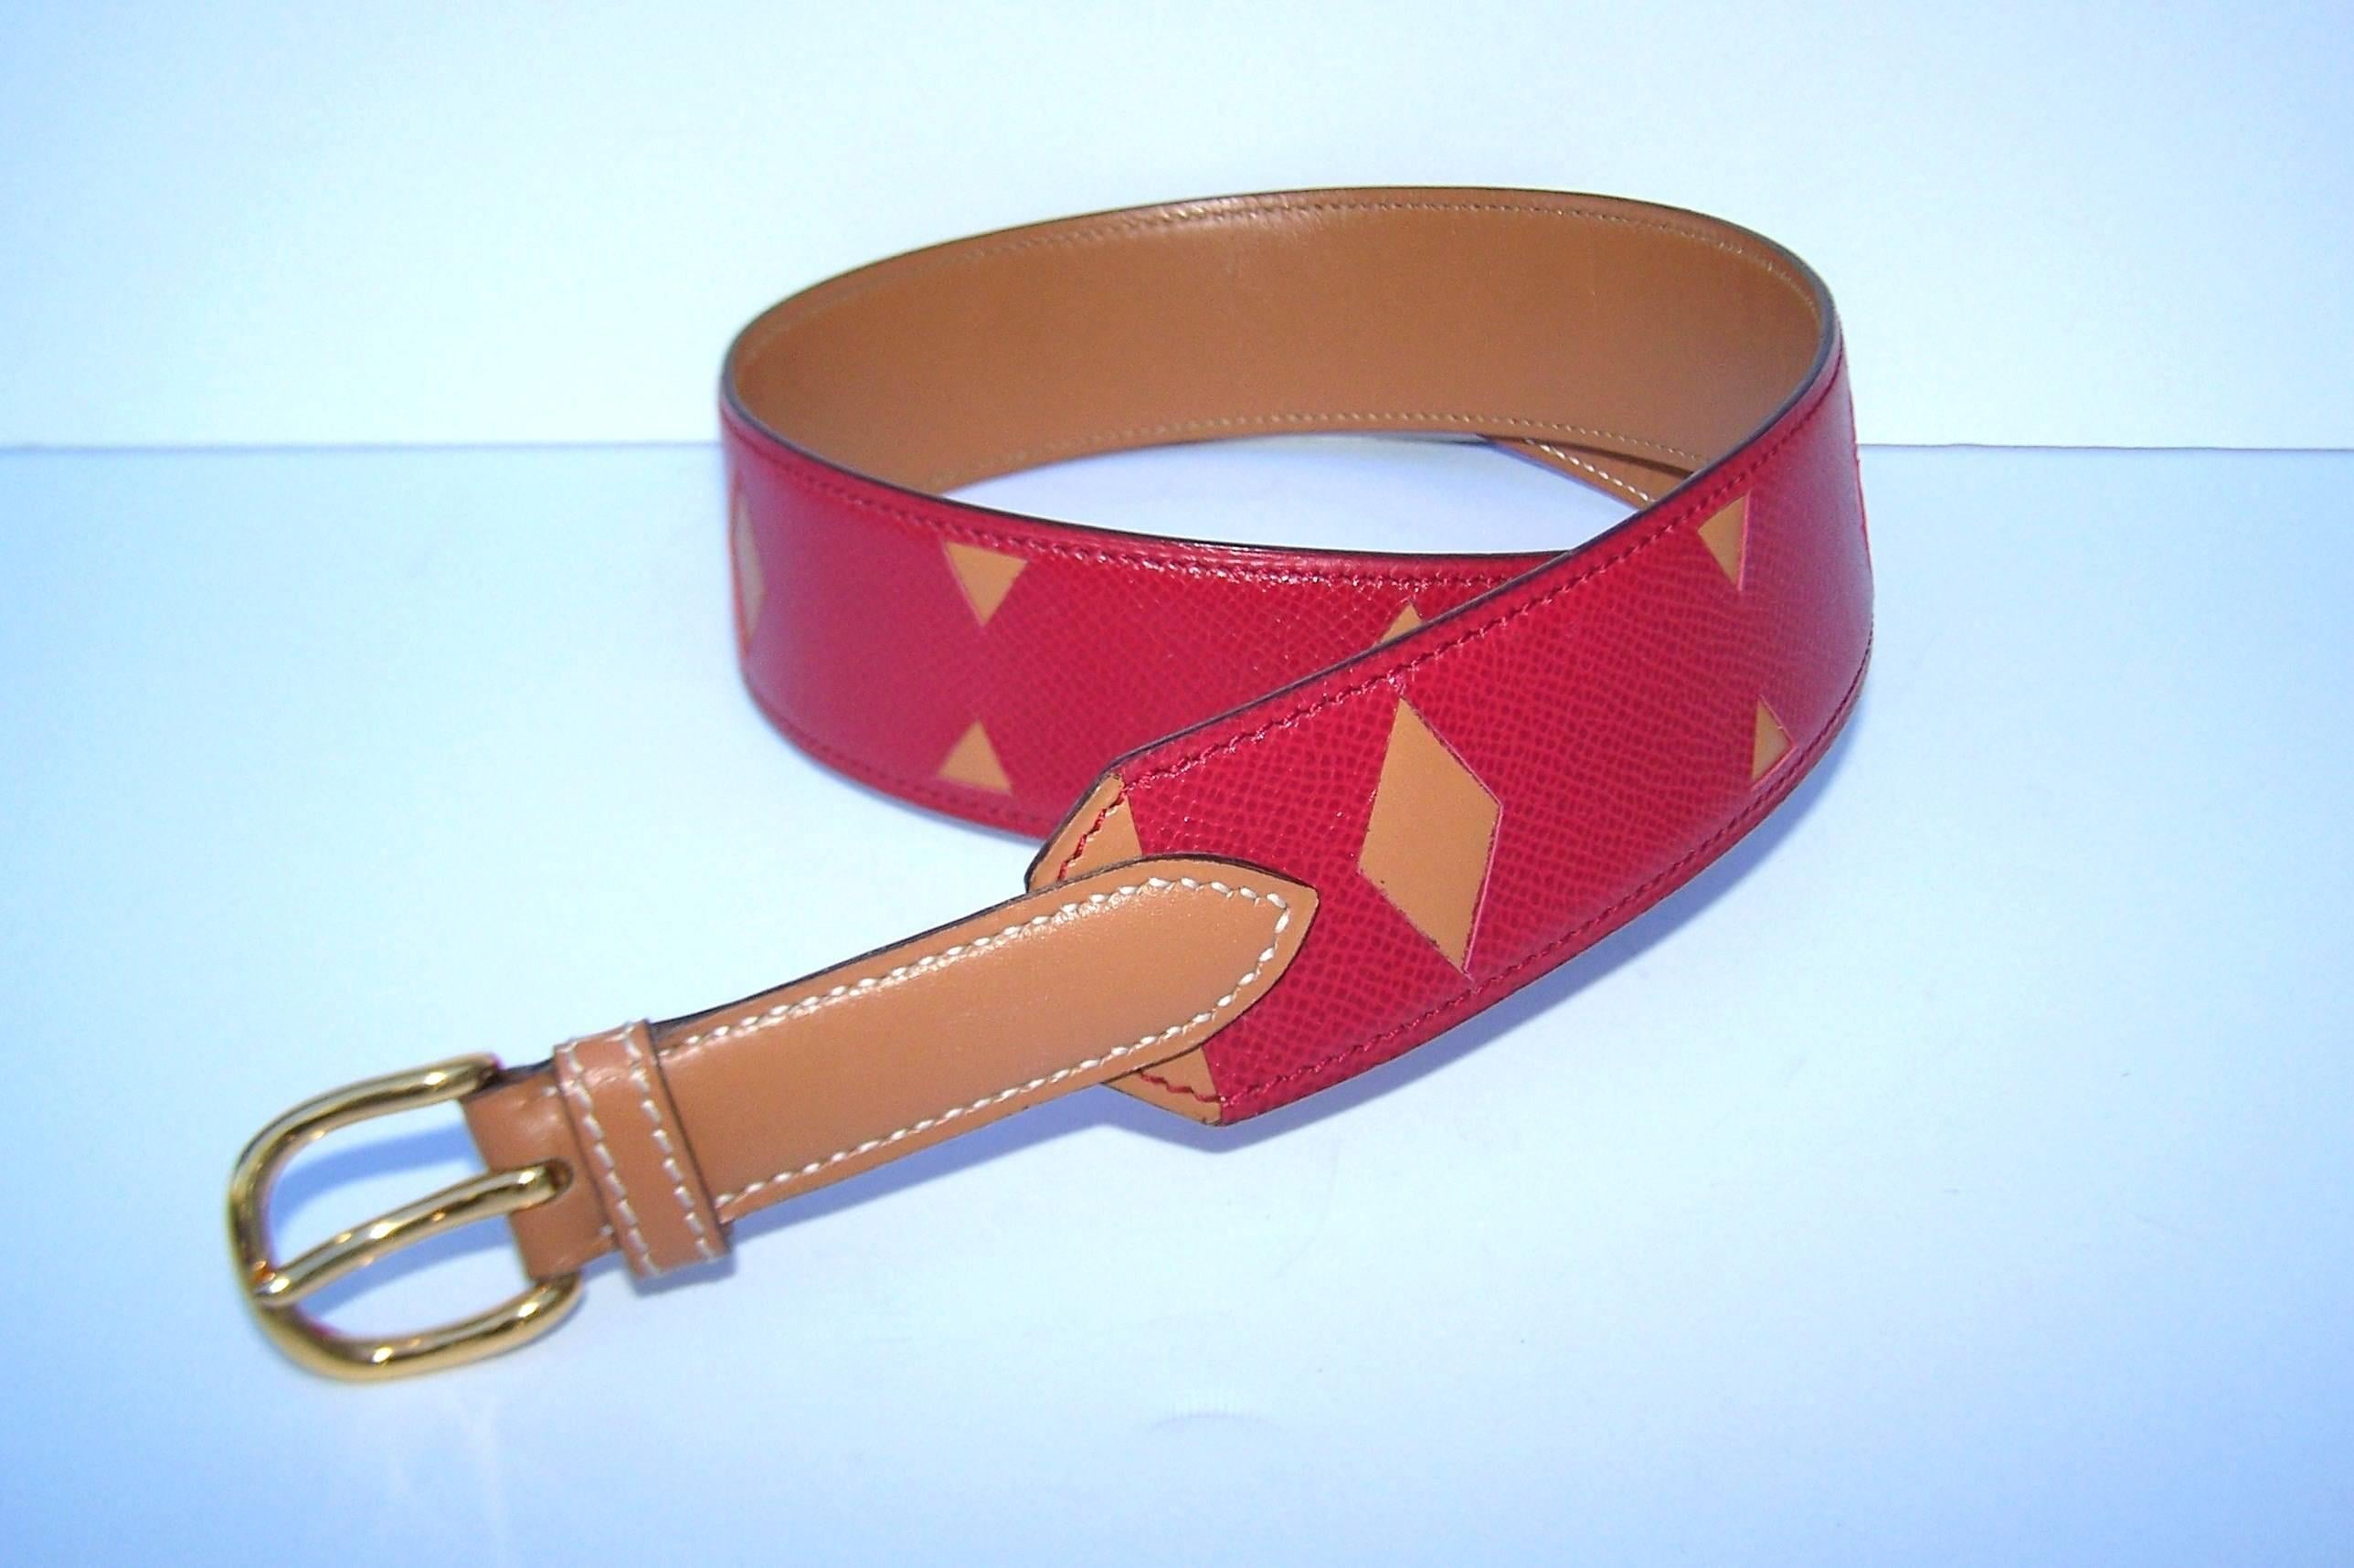 A classic with a twist!  Hermes has created a fun two tone belt by layering a camel leather (Hermes 'Gold') with red (Hermes 'Rouge Casaque') calfskin cut work in graphic patterns.  Put it all together with gold metal hardware and voila!  A belt